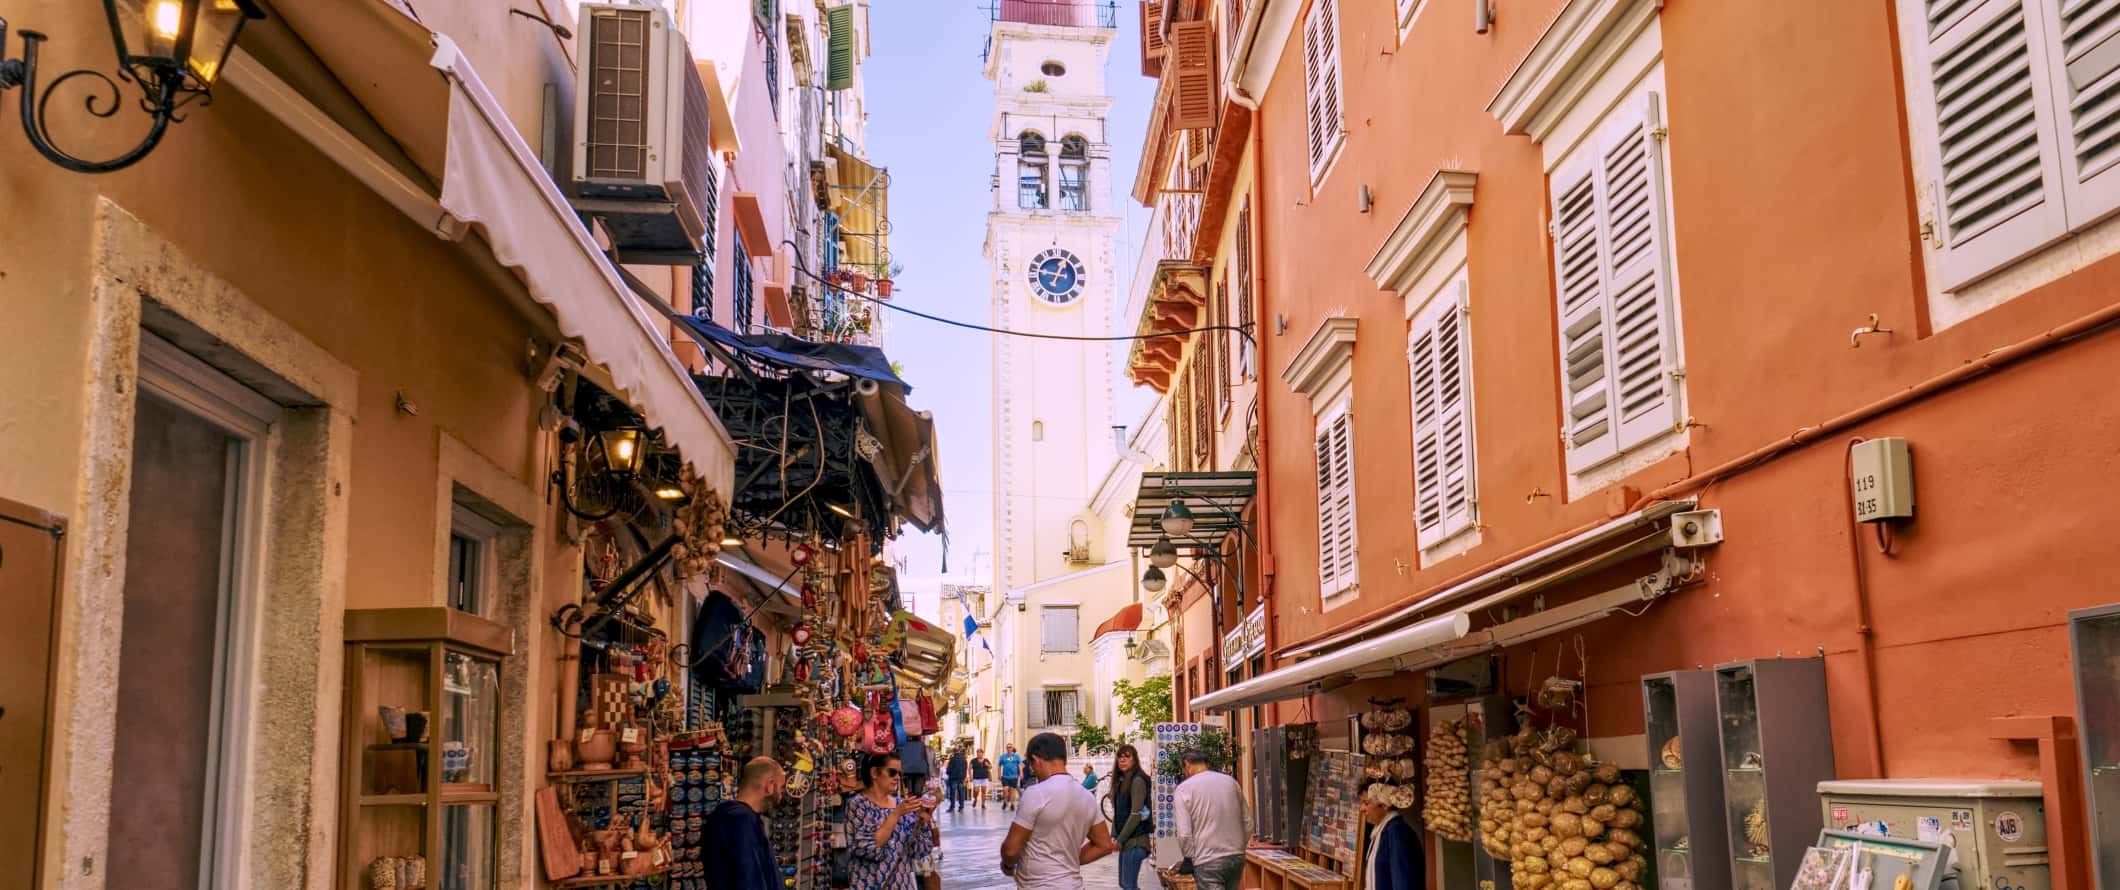 View of a bell tower at the end of the busy narrow streets in the city of Corfu, Greece.